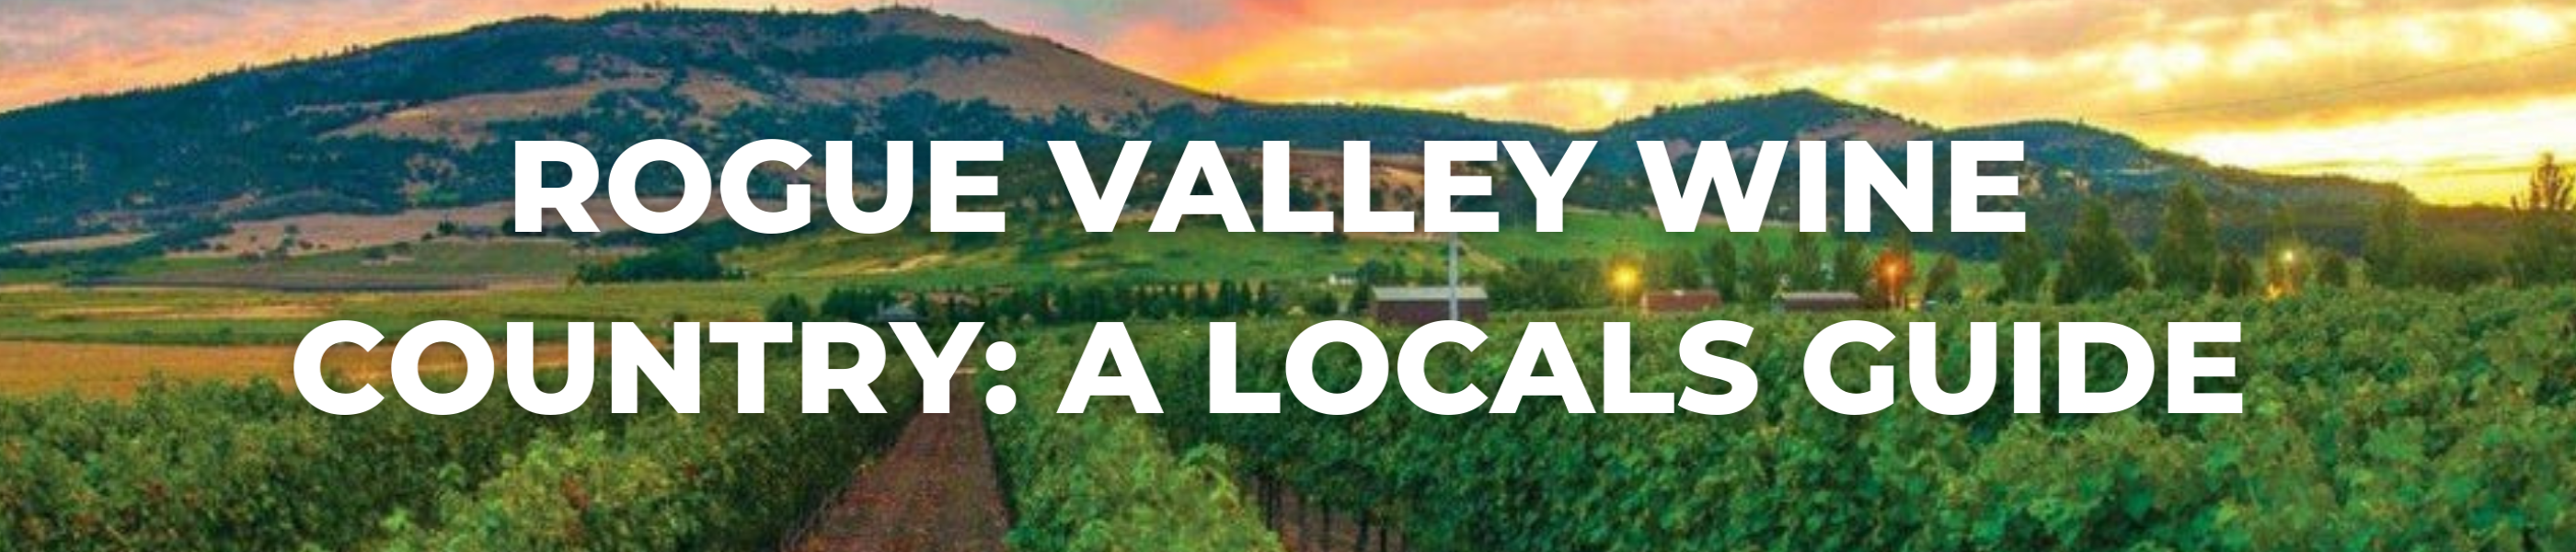 blog header, your complete guide to medford's wine country, rogue valley wine country: a local's guide